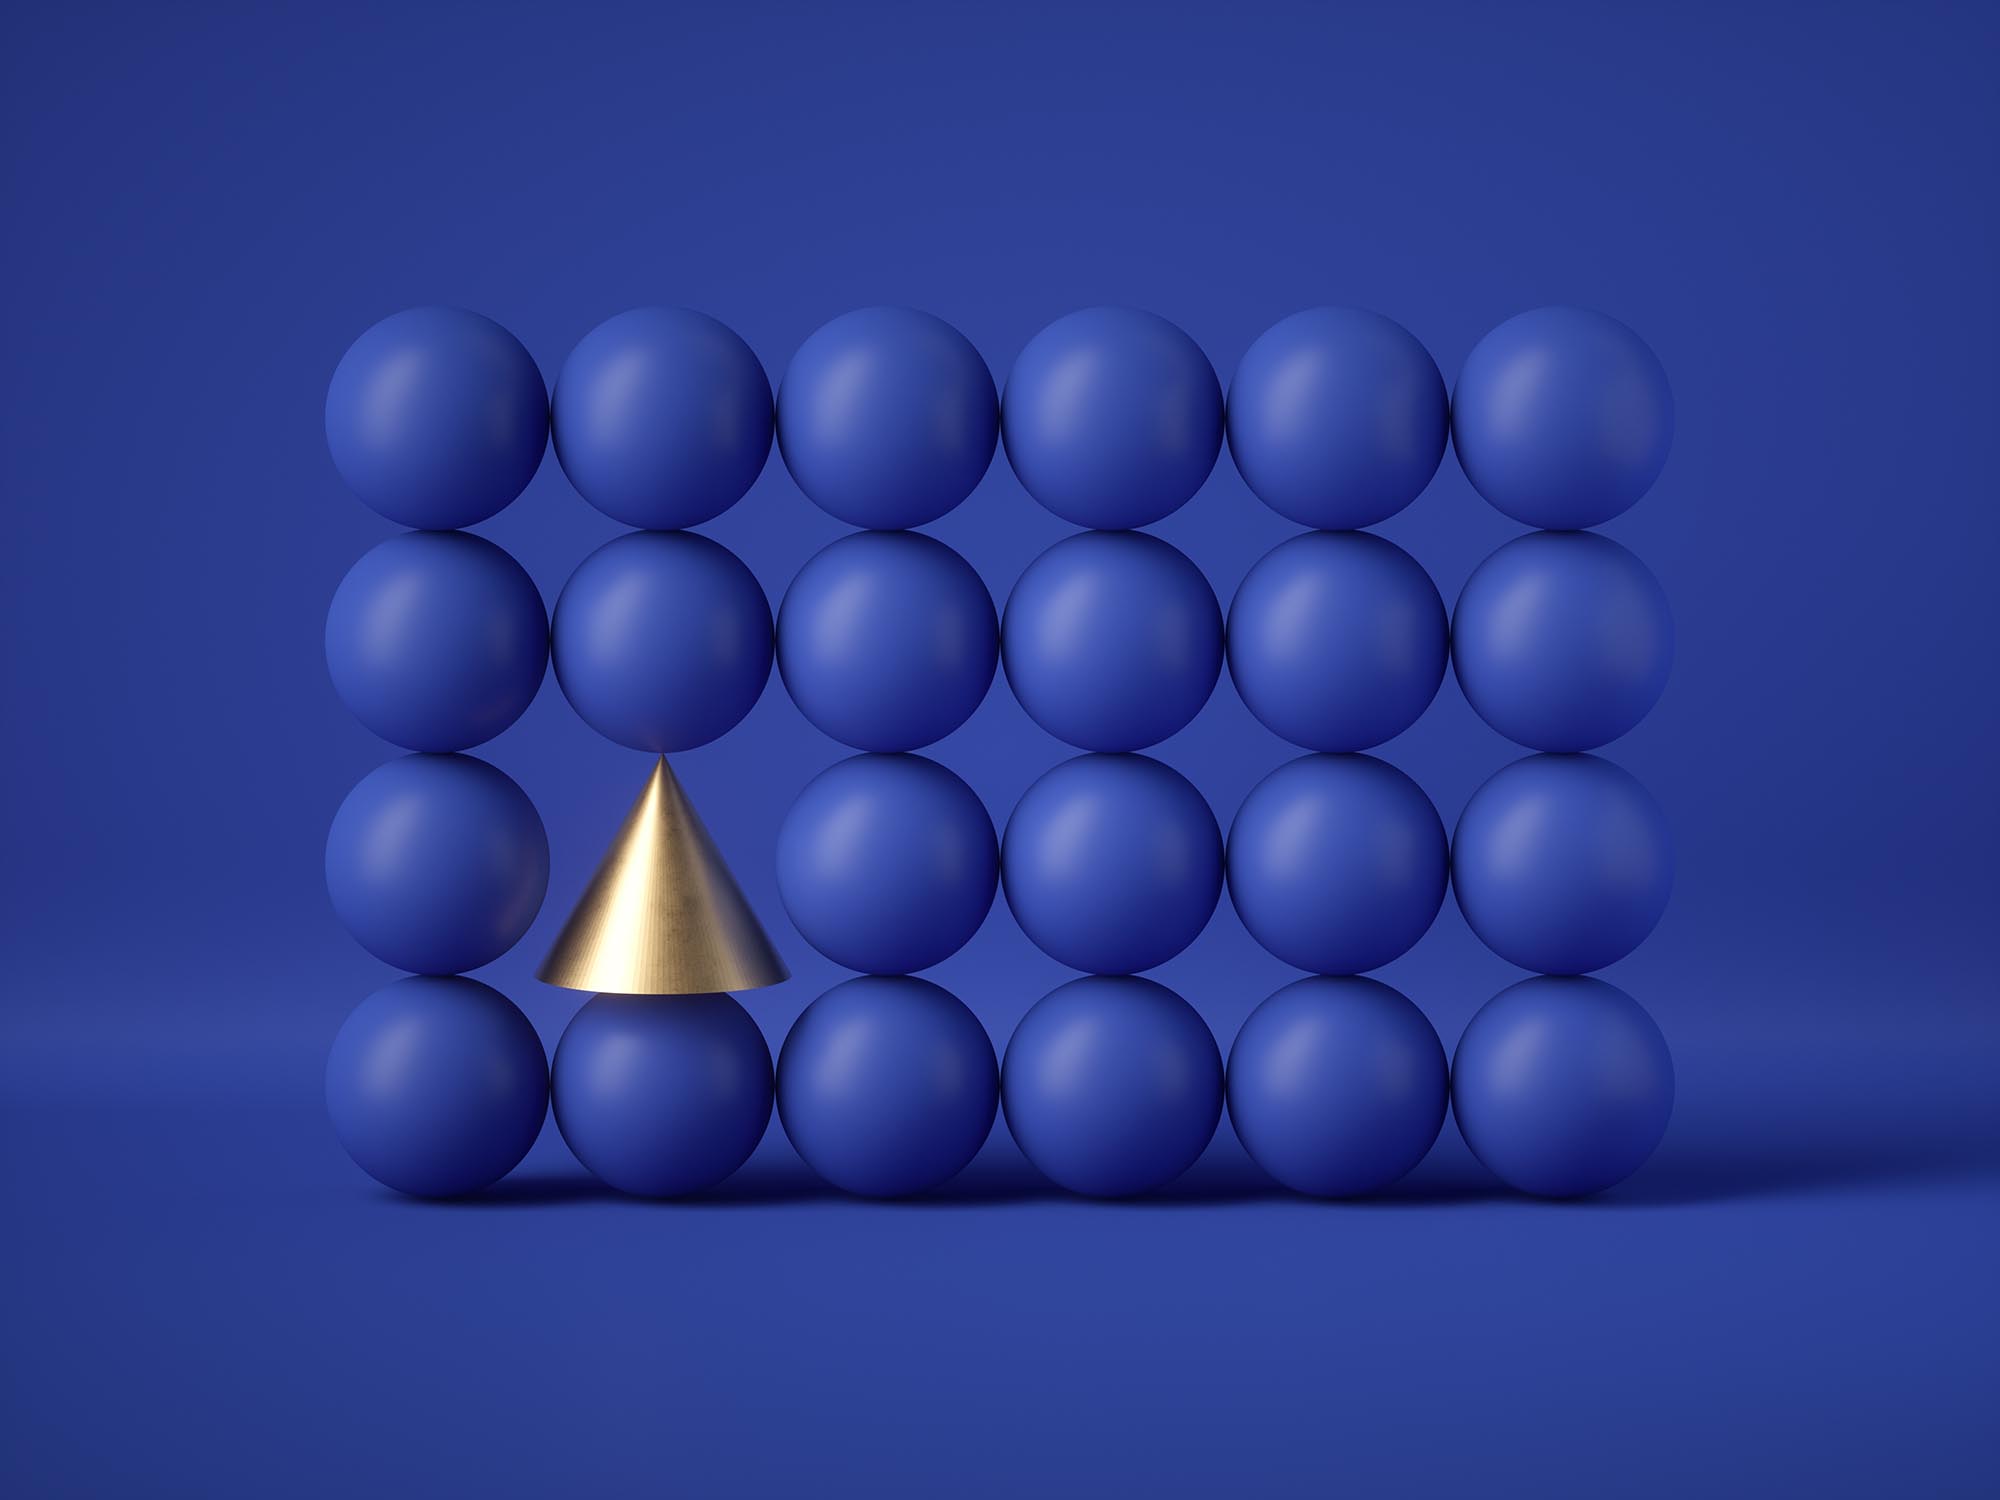 abstract geometric design: gold cone amongst blue balls isolated on blue background